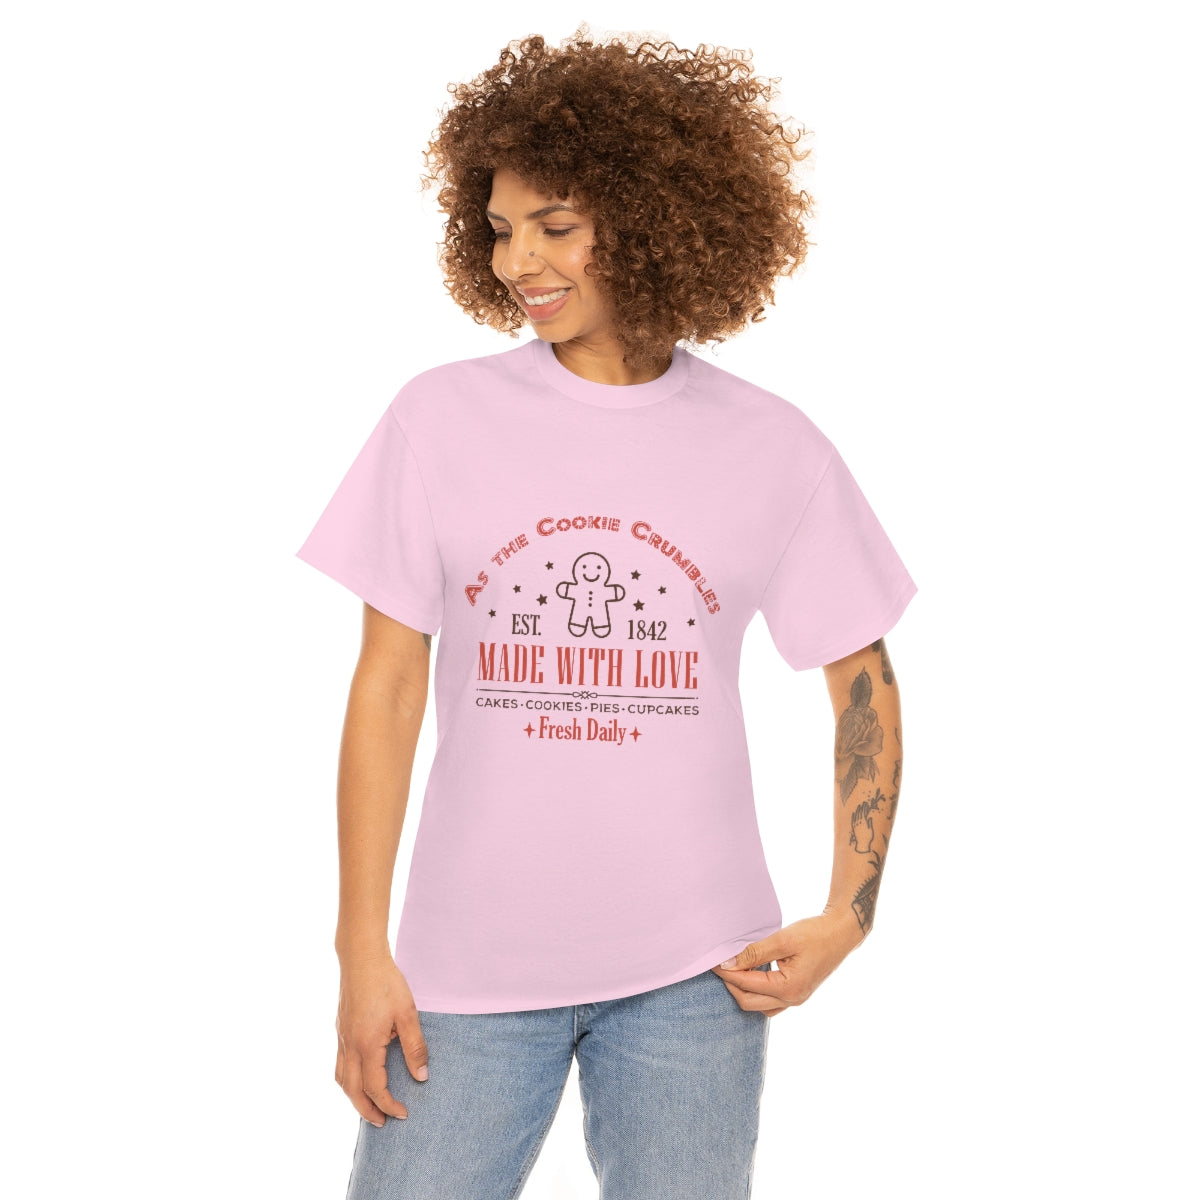 As the Cookie Crumbles T-Shirt